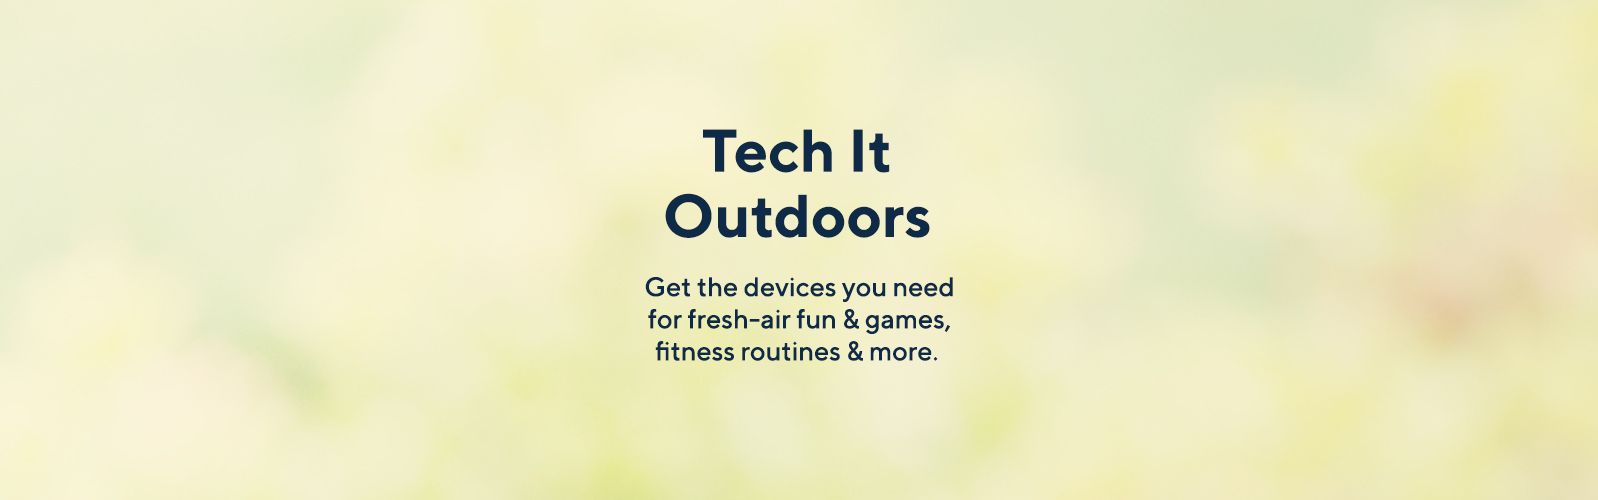 Tech It Outdoors - Get the devices you need for fresh-air fun & games, fitness routines & more. 